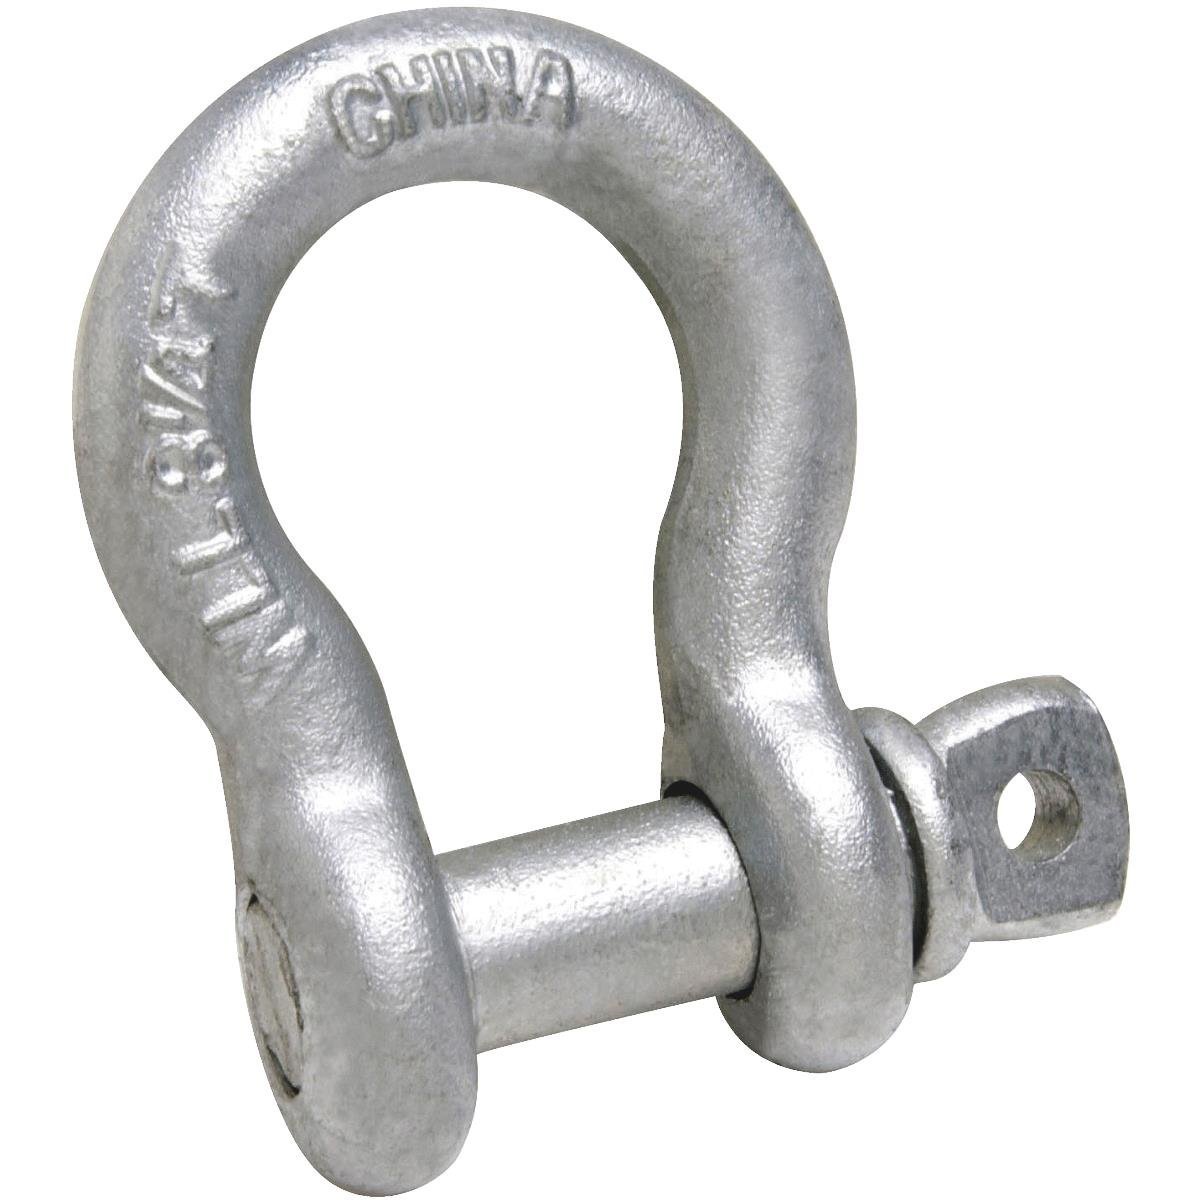 Picture of Apex Tool Group T9640335 0.187 in. Campbell Screw Pin Anchor Shackle